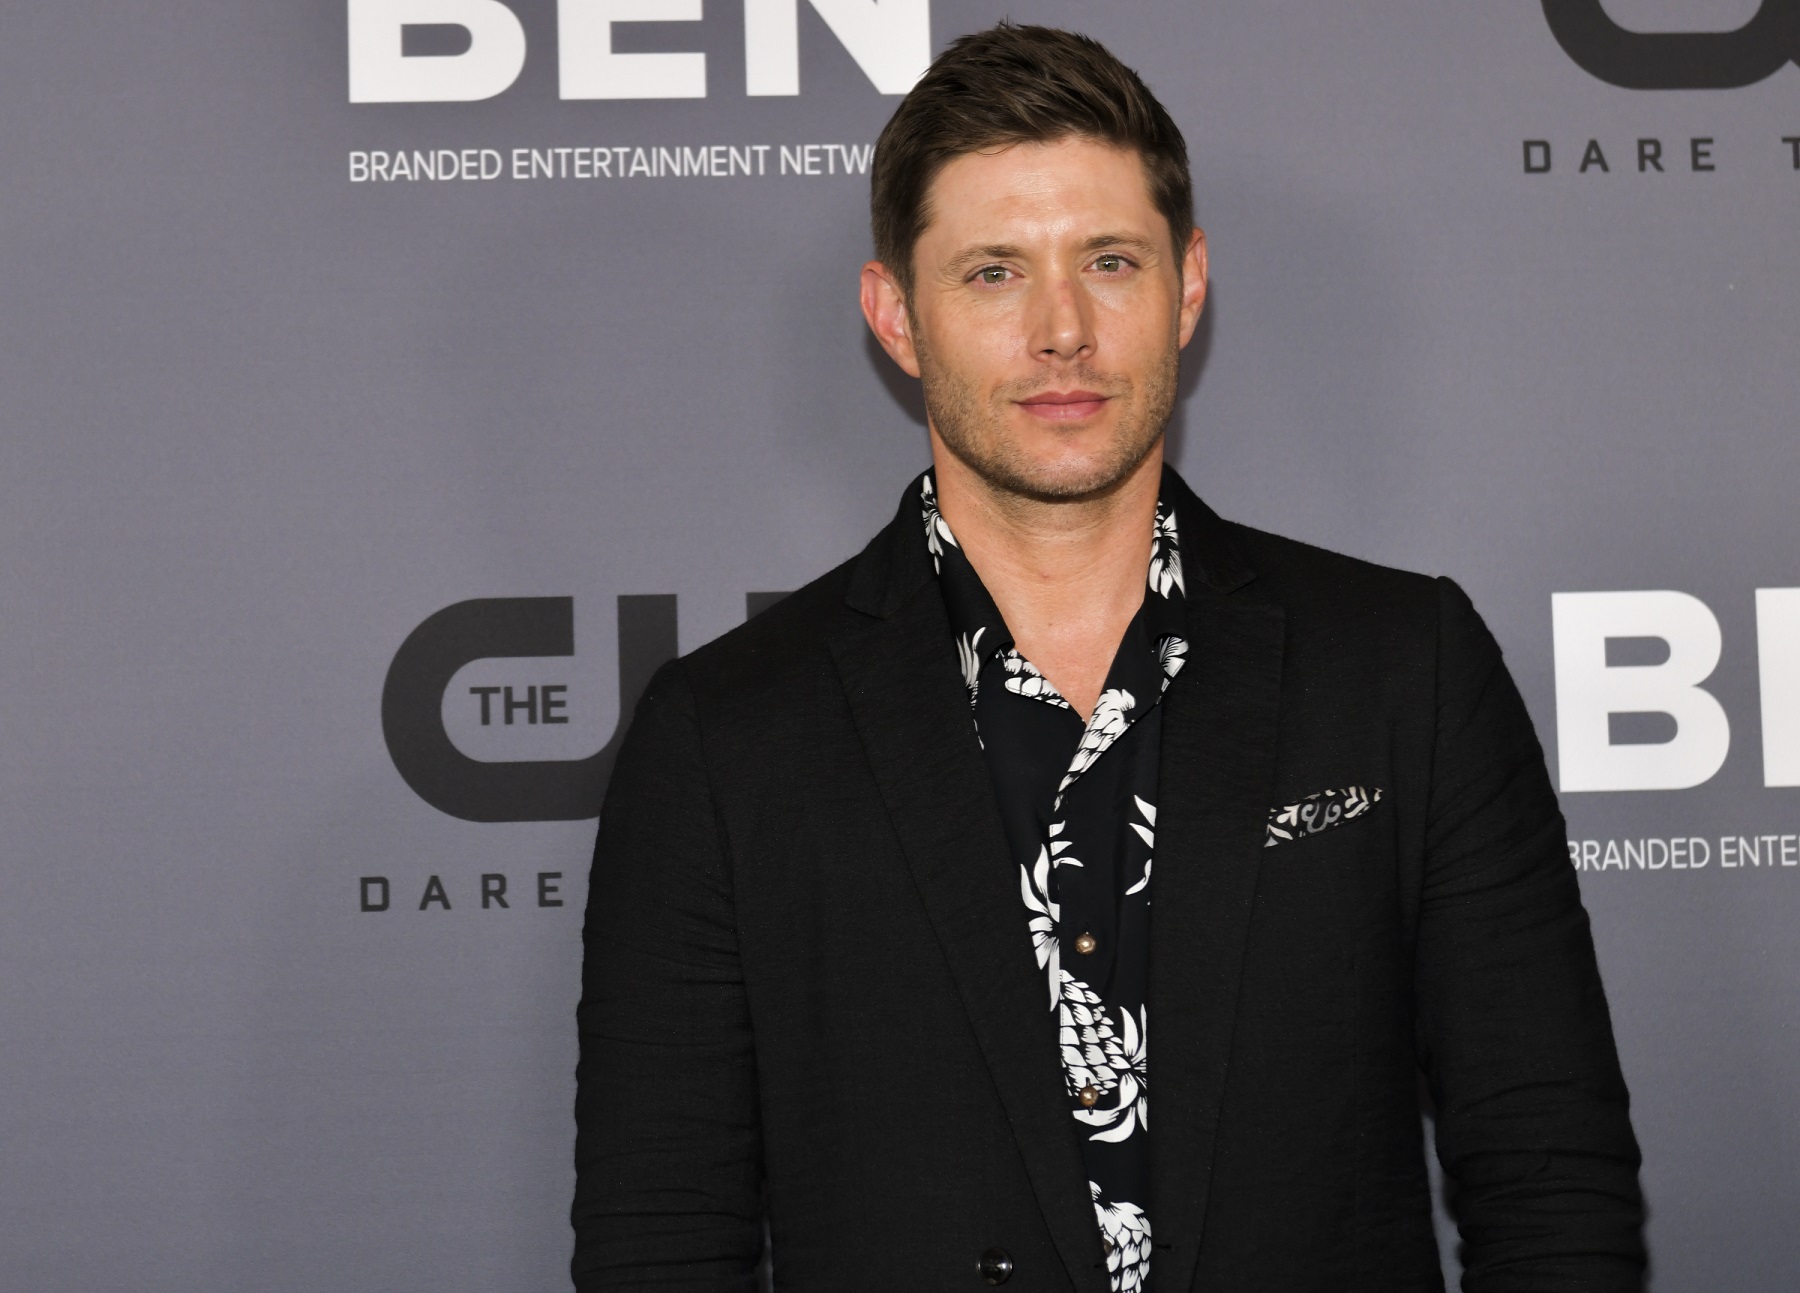 Jensen Ackles, who played Eric Brady on Days of Our Lives, pictured here in a black jacket